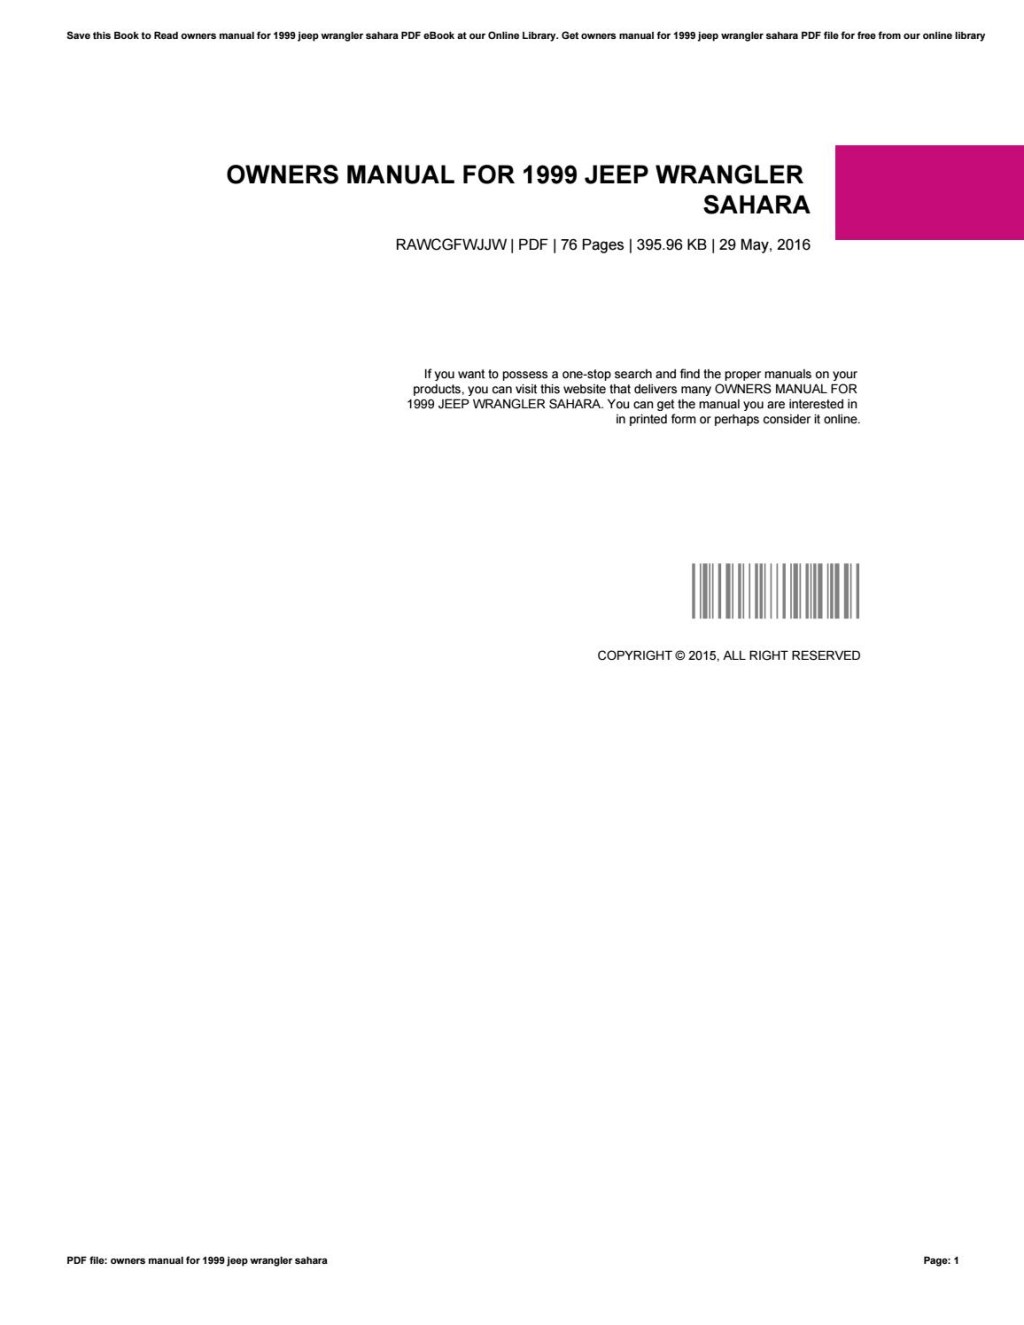 Picture of: Owners manual for  jeep wrangler sahara by oing – Issuu